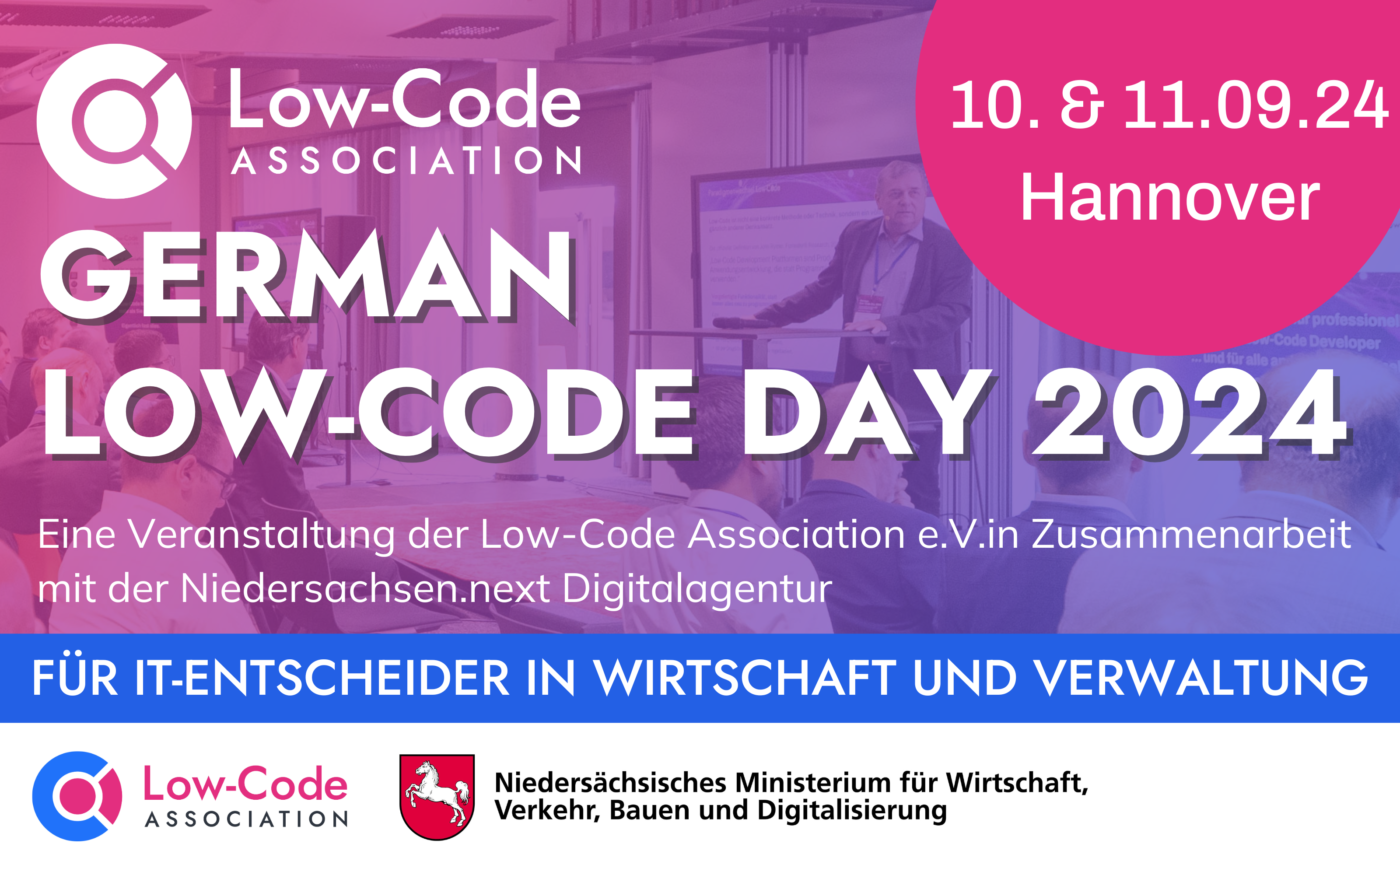 German Low-Code Day in Hannover